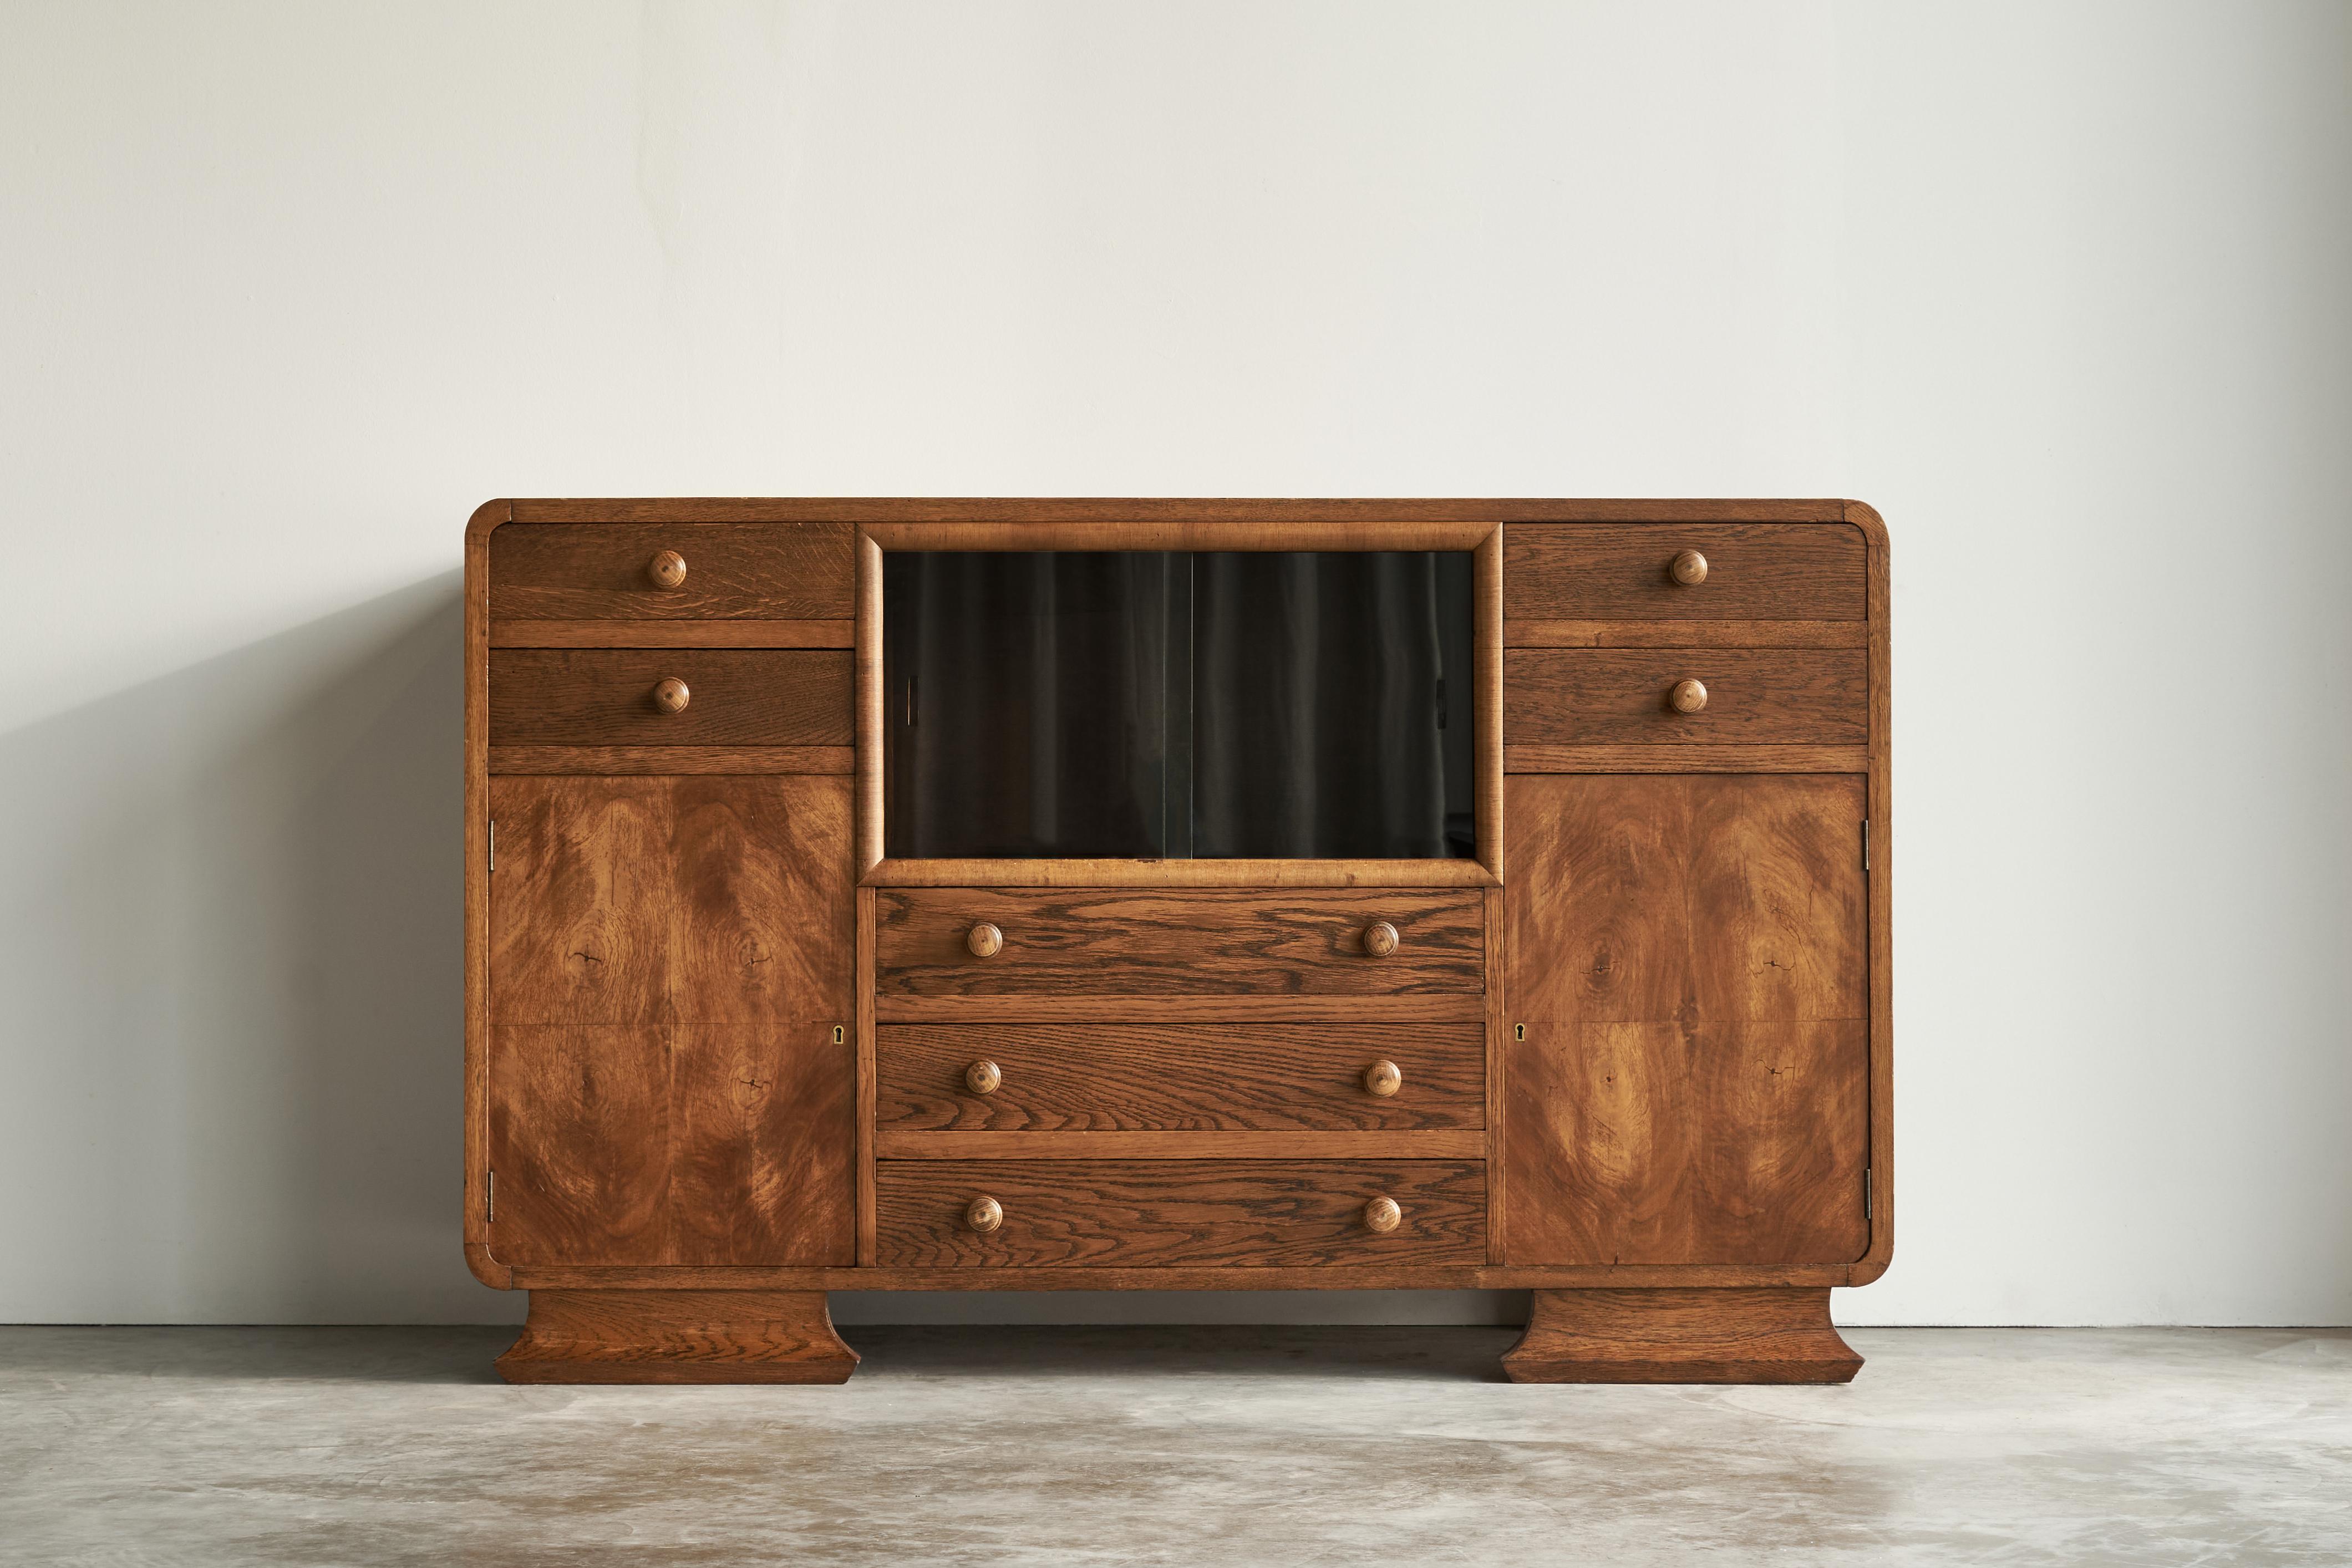 Art Deco Cabinet in Oak, Sweden, 1940s.

Very distinct Art Deco cabinet with glass sliding doors, well executed in oak, oak veneer and oak burl veneer. It origins from Sweden, 1940s.

This cabinet shows a modernistic and symmetrical yet